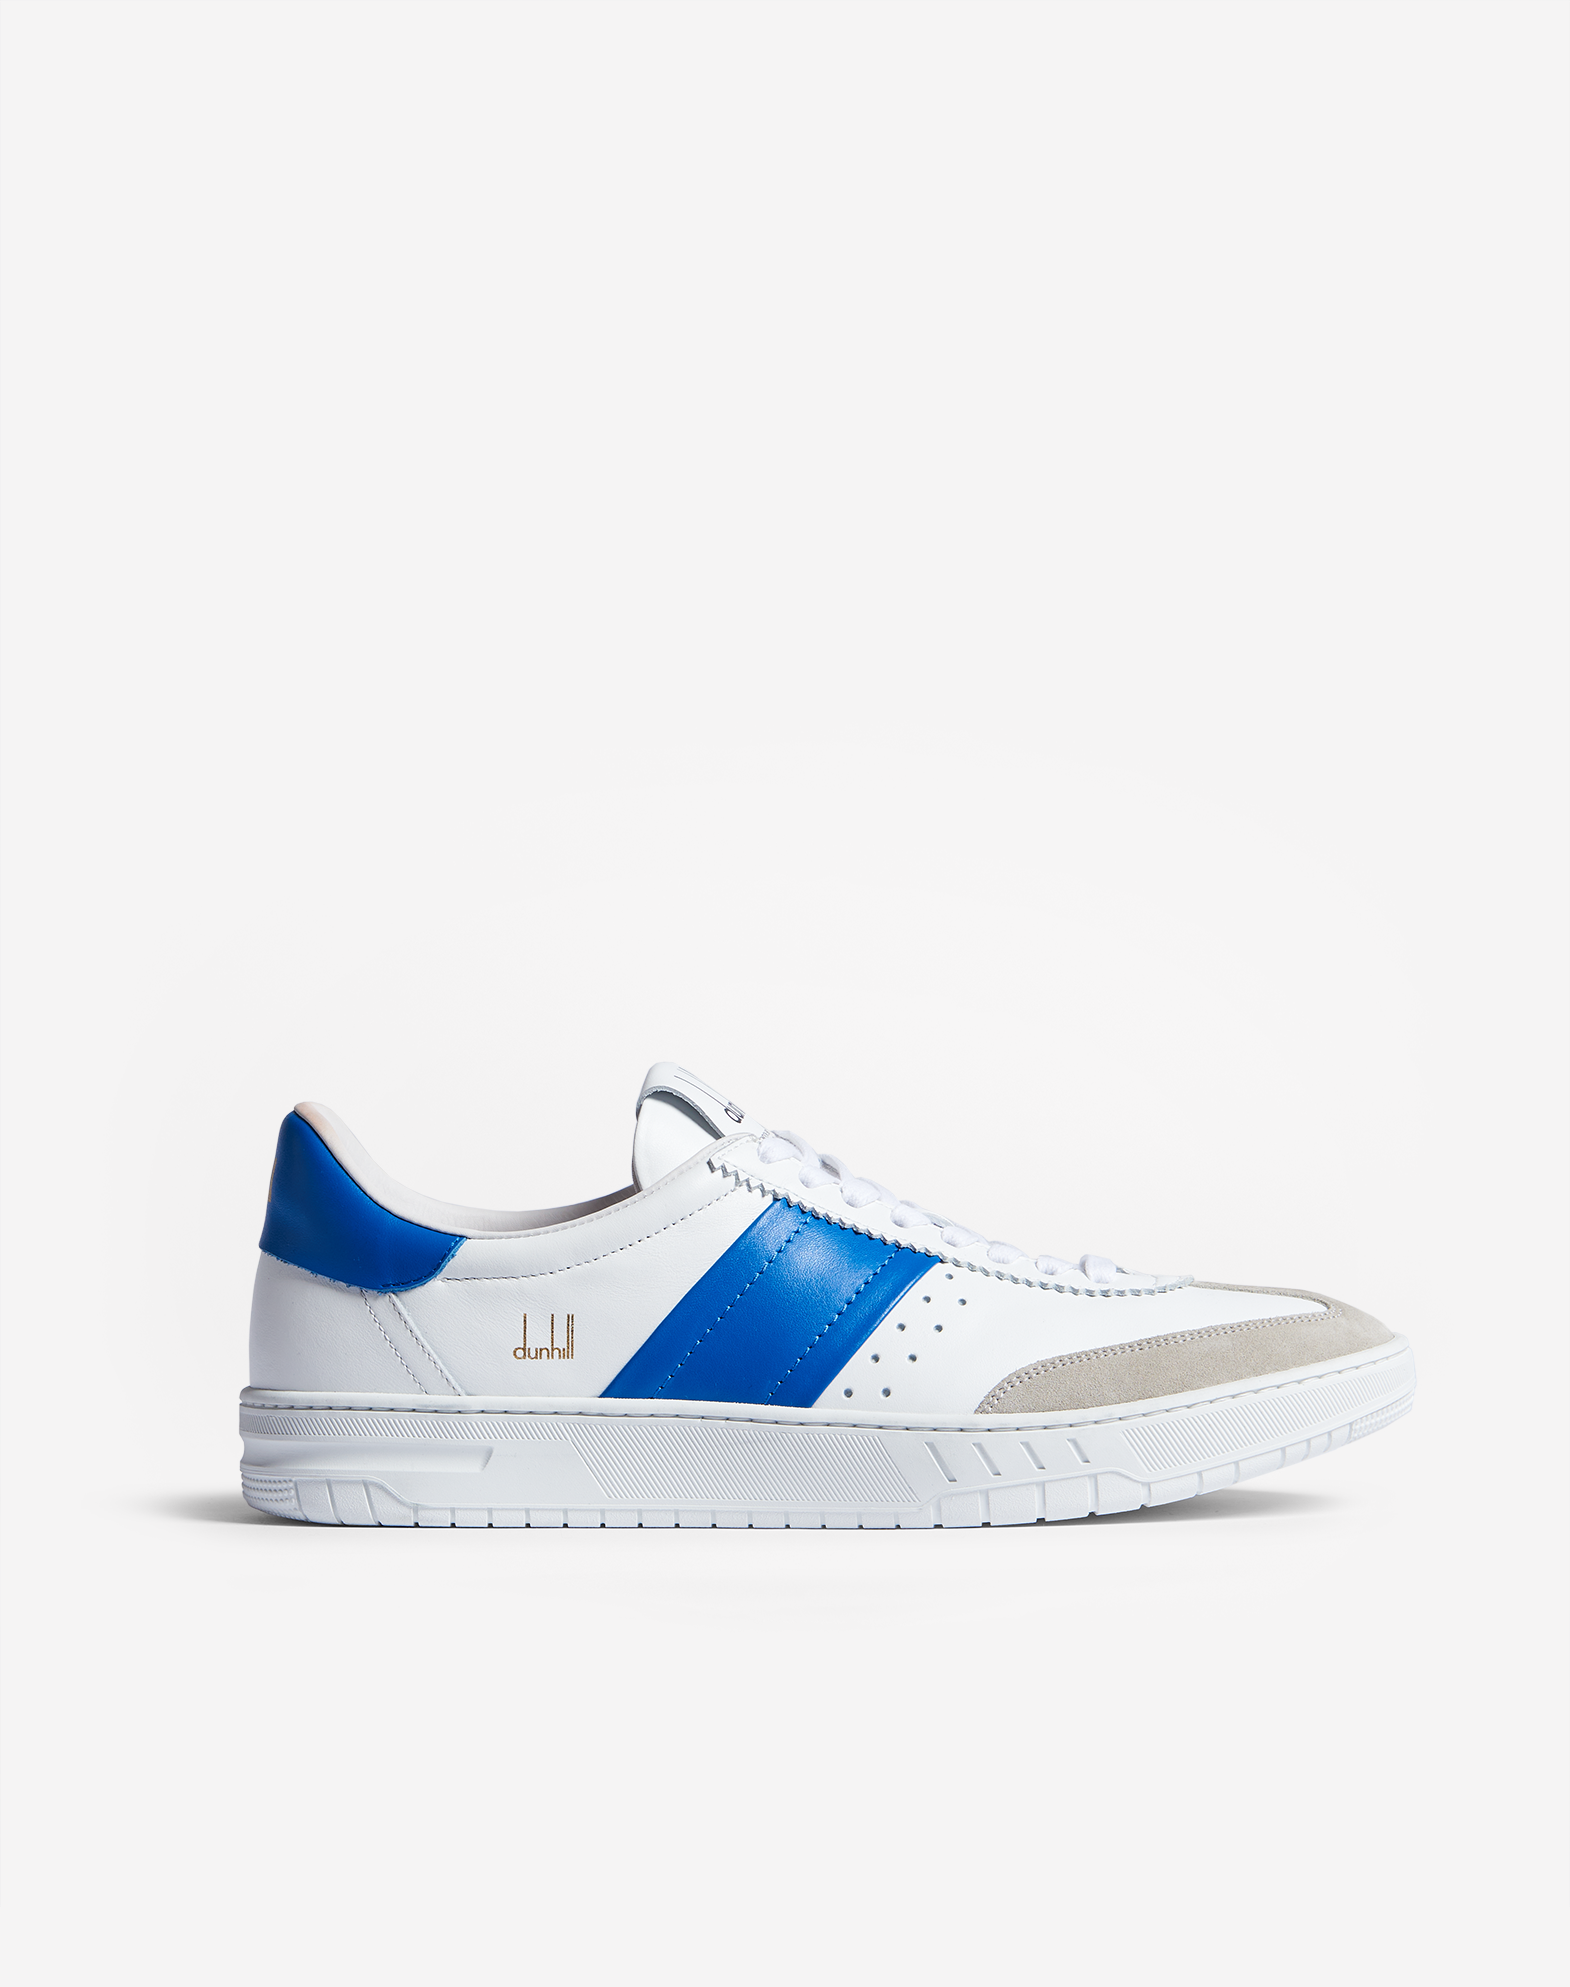 DUNHILL COURT LEGACY TRAINER